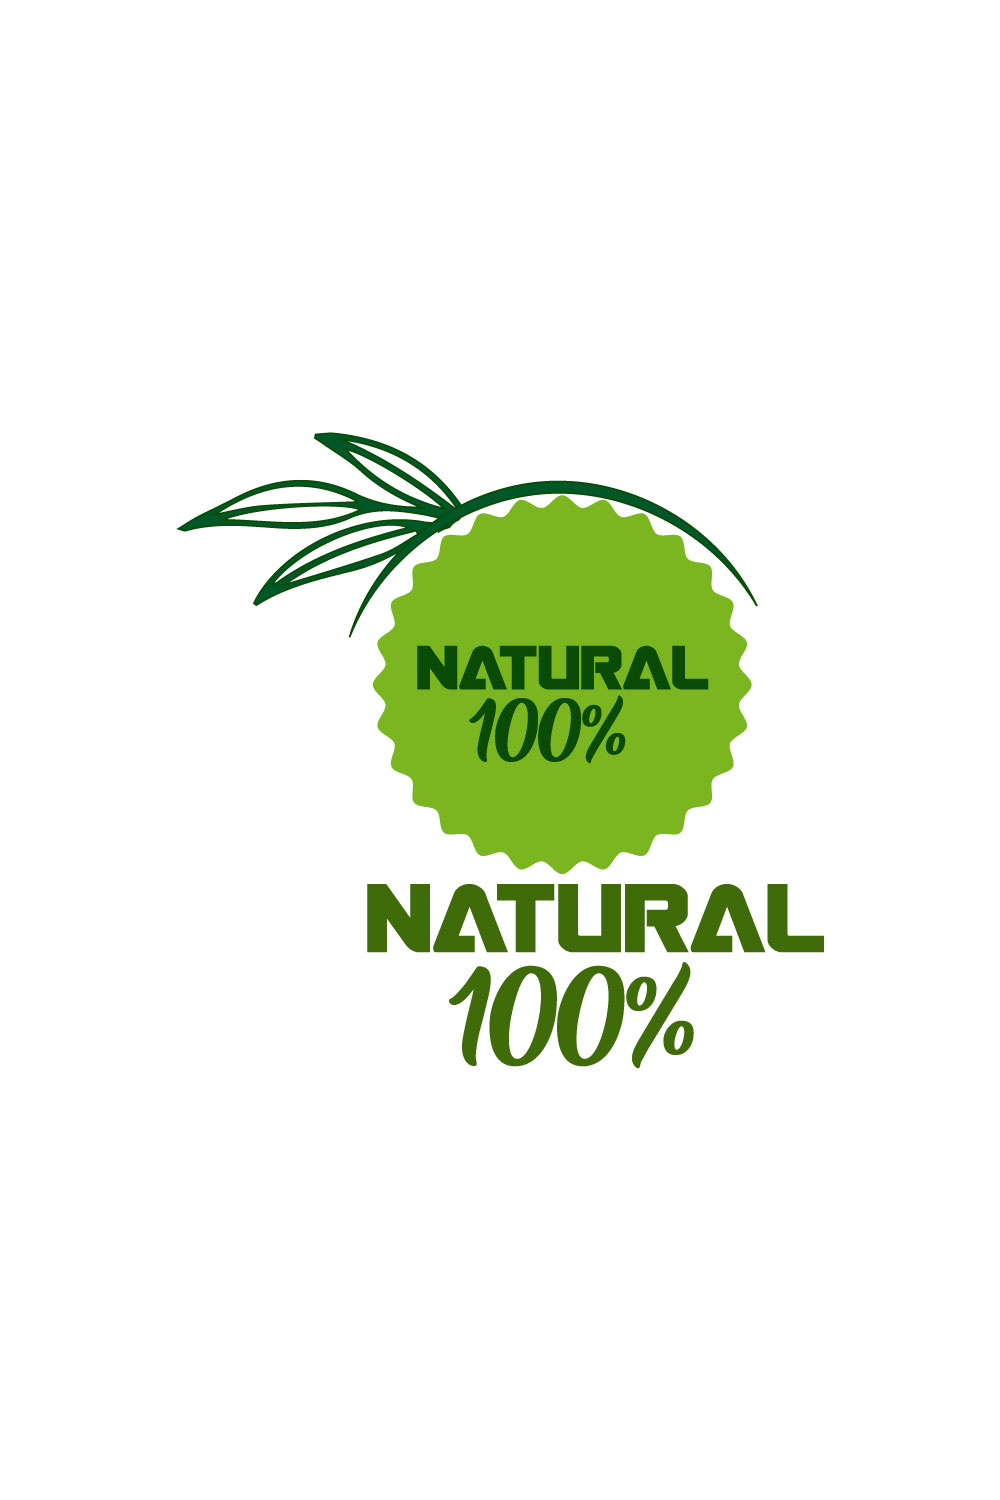 Free herbal product logo pinterest preview image.